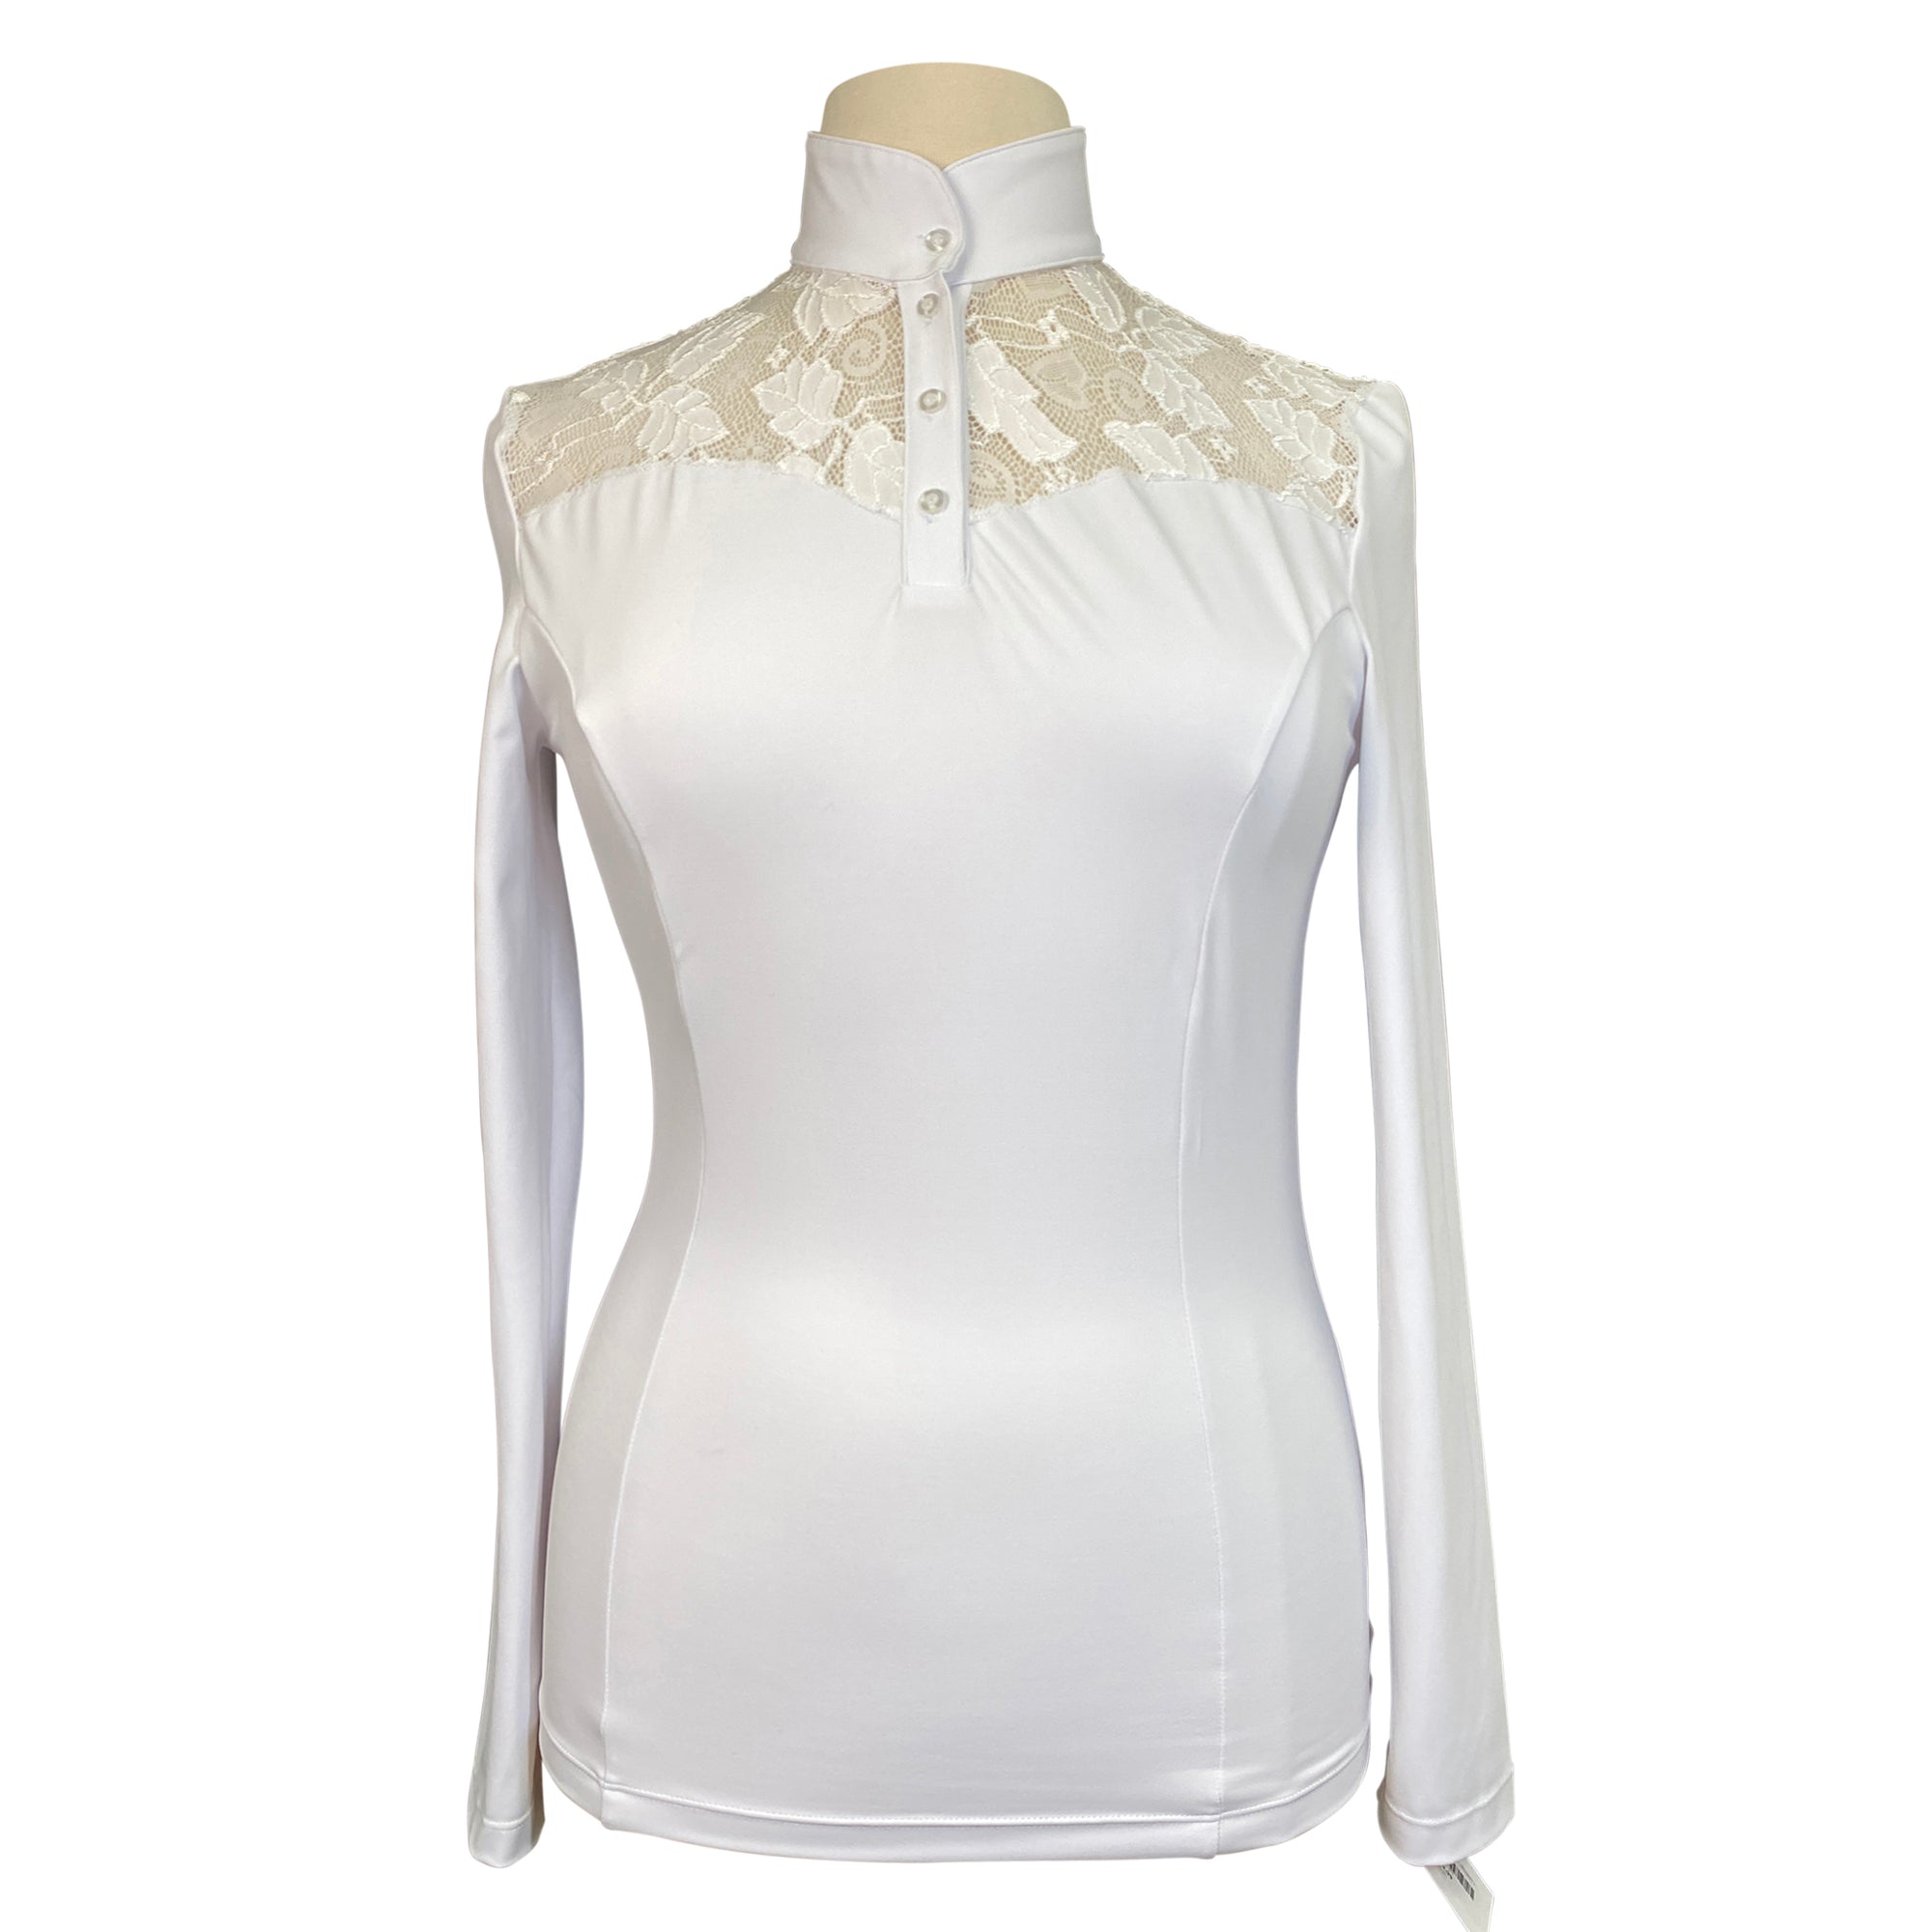 Equisite 'Alice' Shirt in White